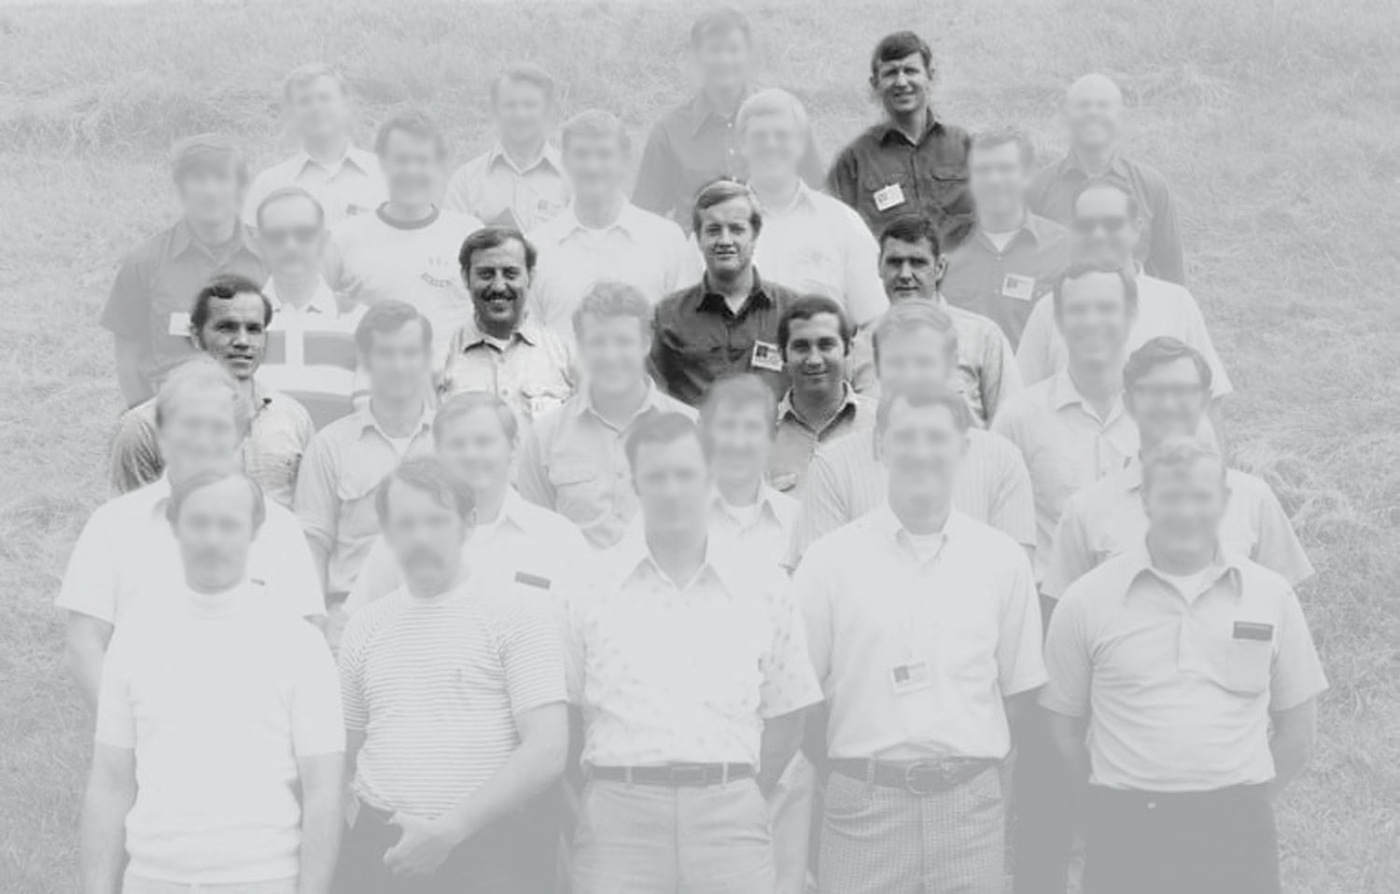 SWAT operators (highlighted from left) Roger DePue, Ken Parkerson, Jim Horn, Tase Bailey, Jim Huggins, and D. Michael Griffith in 1973. The six members attended a Society of Former Special Agents of the FBI event last summer in Lexington, Kentucky.